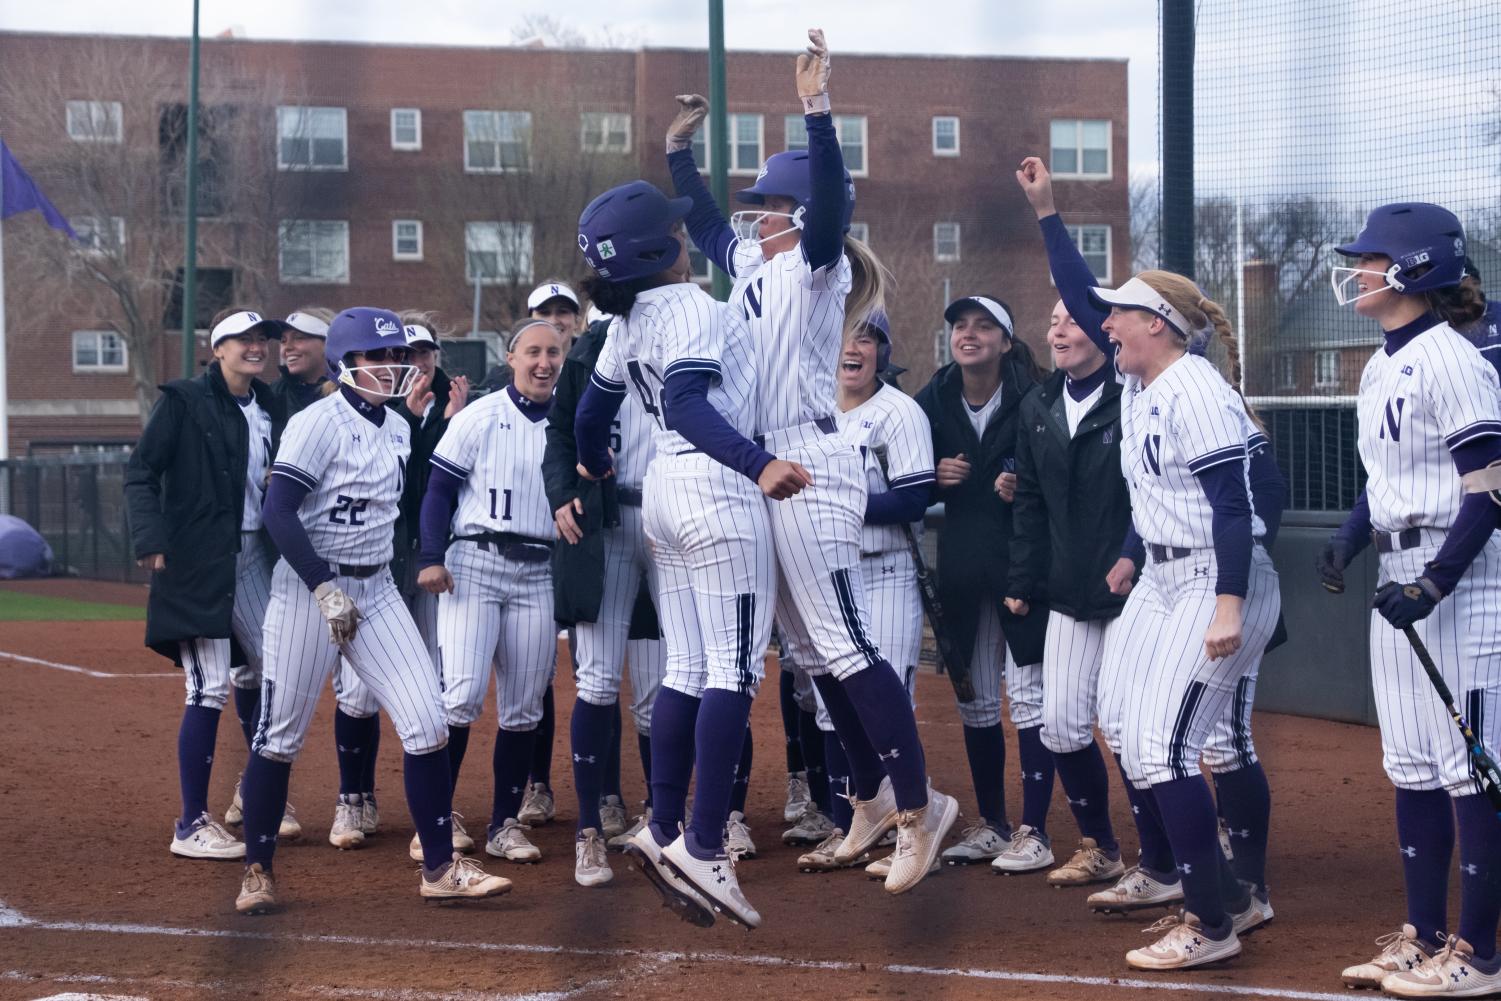 A+group+of+softball+players+in+white+uniforms+with+purple+stripes+are+jumping+and+celebrating+together.